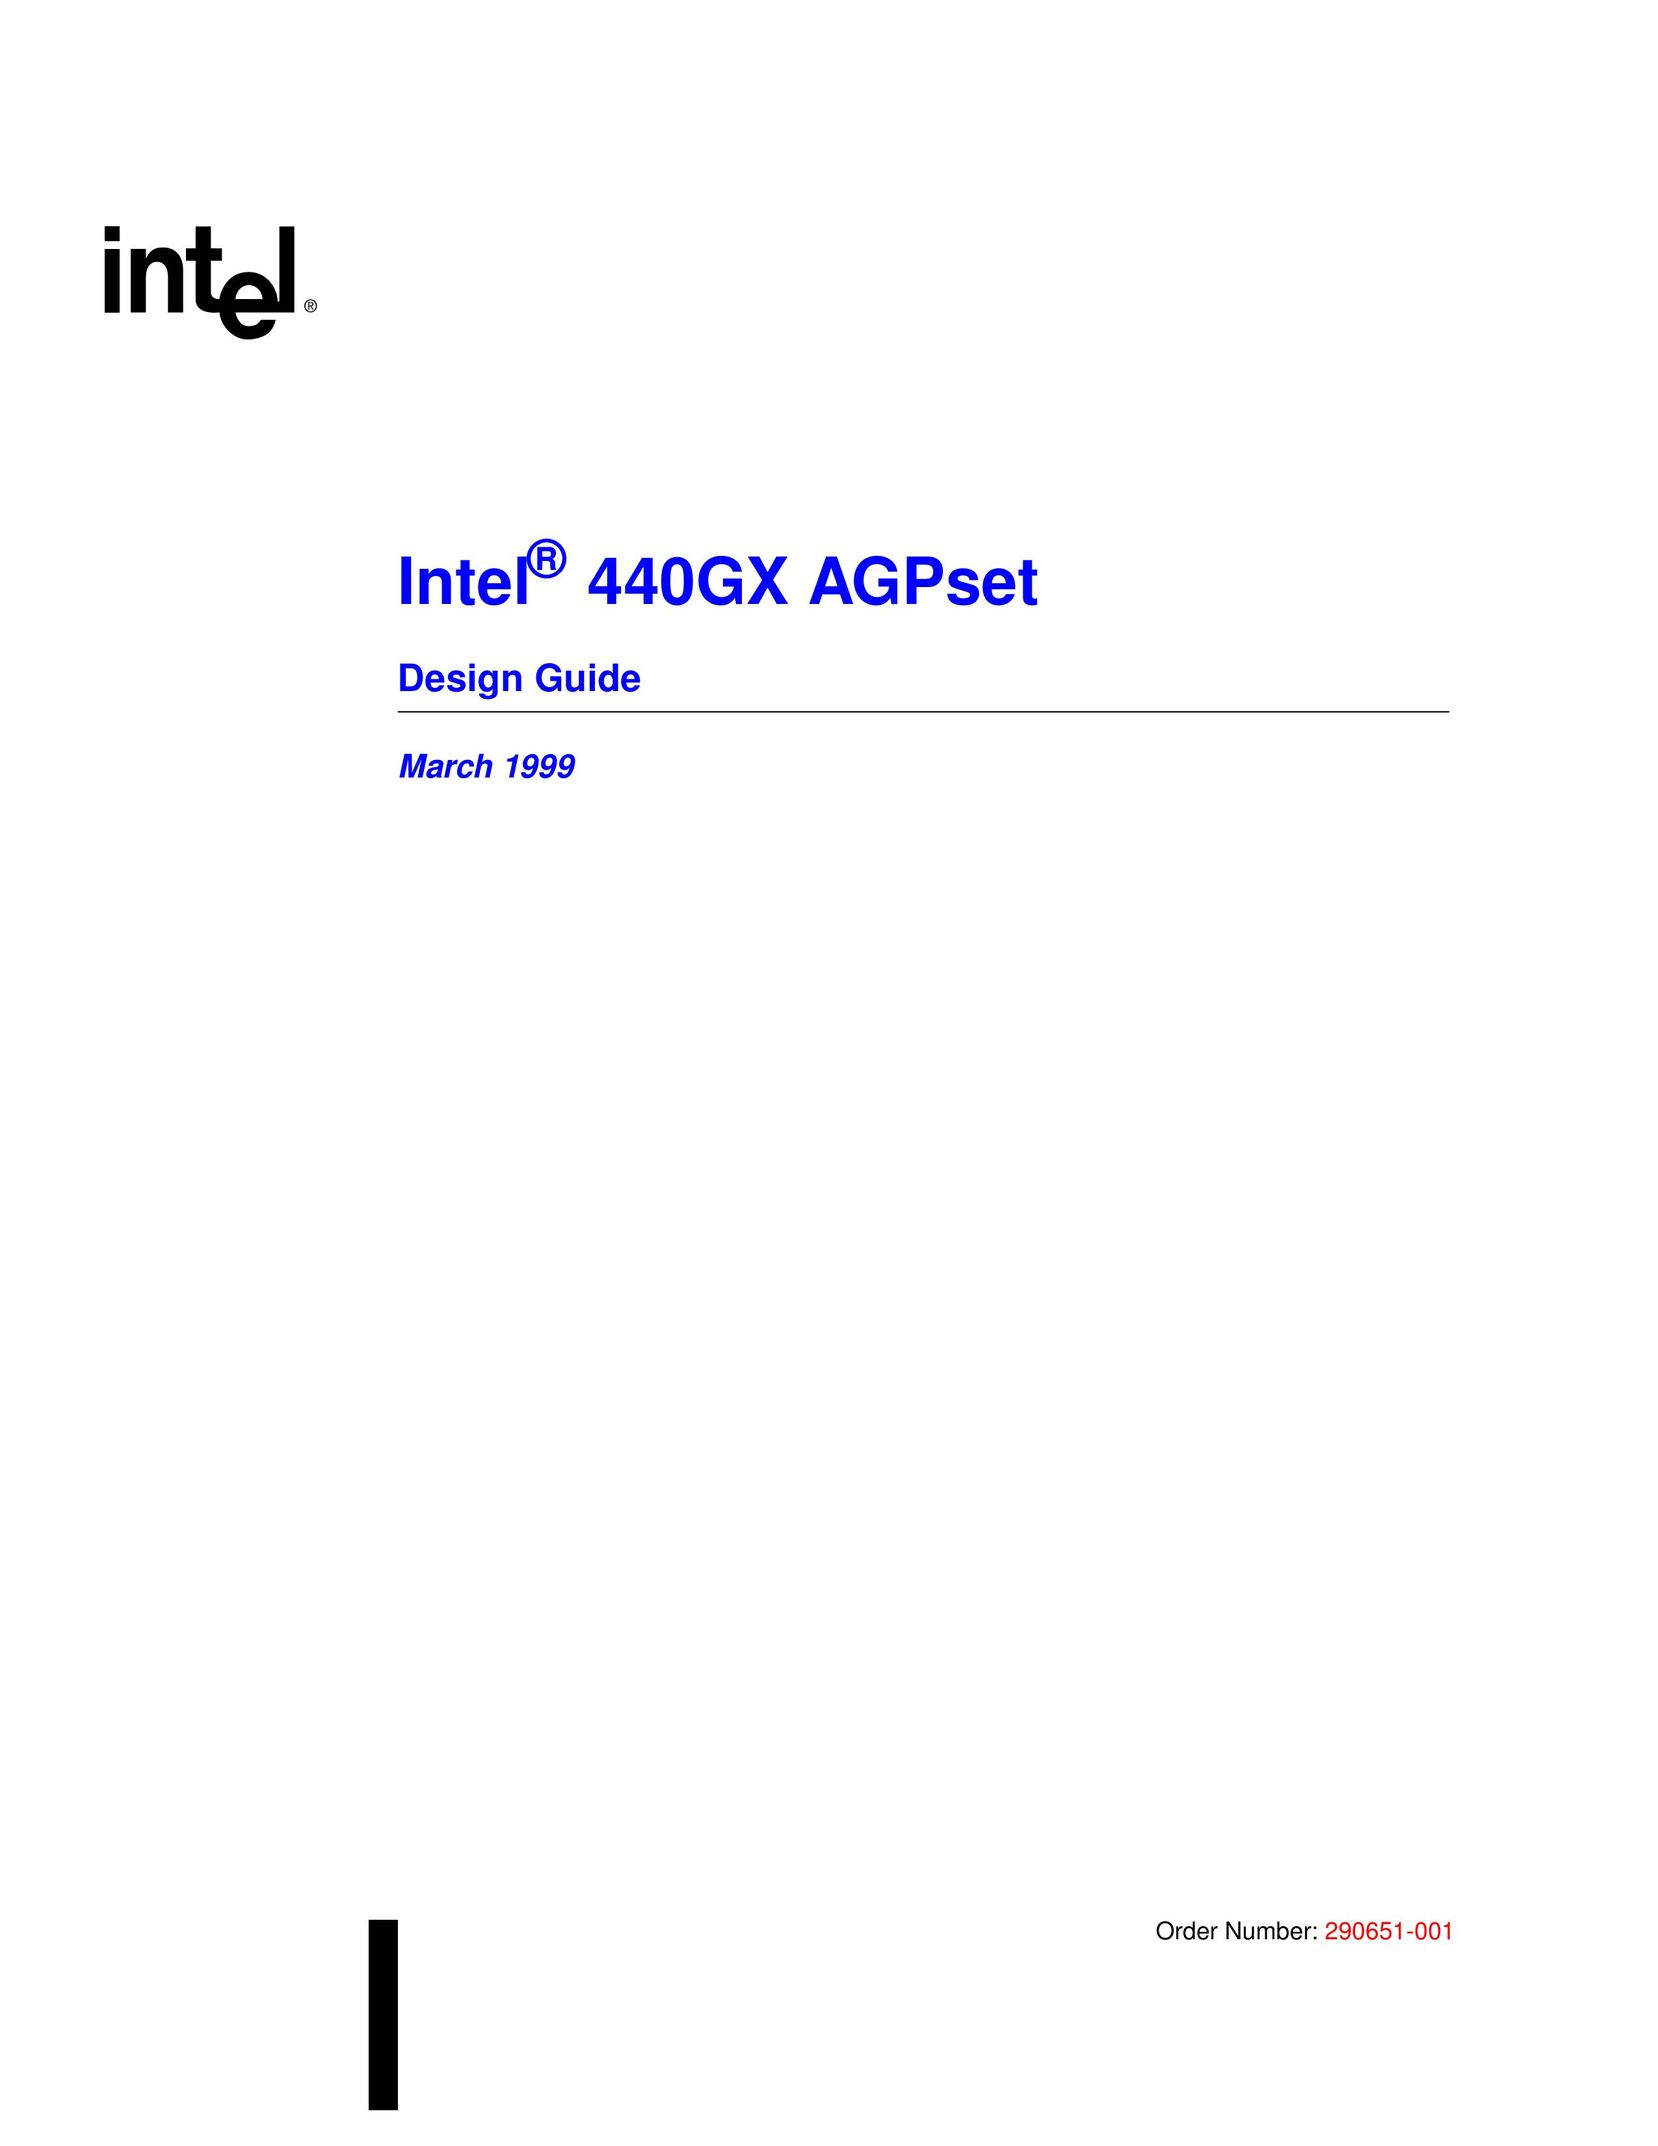 Intel 440GX Network Cables User Manual